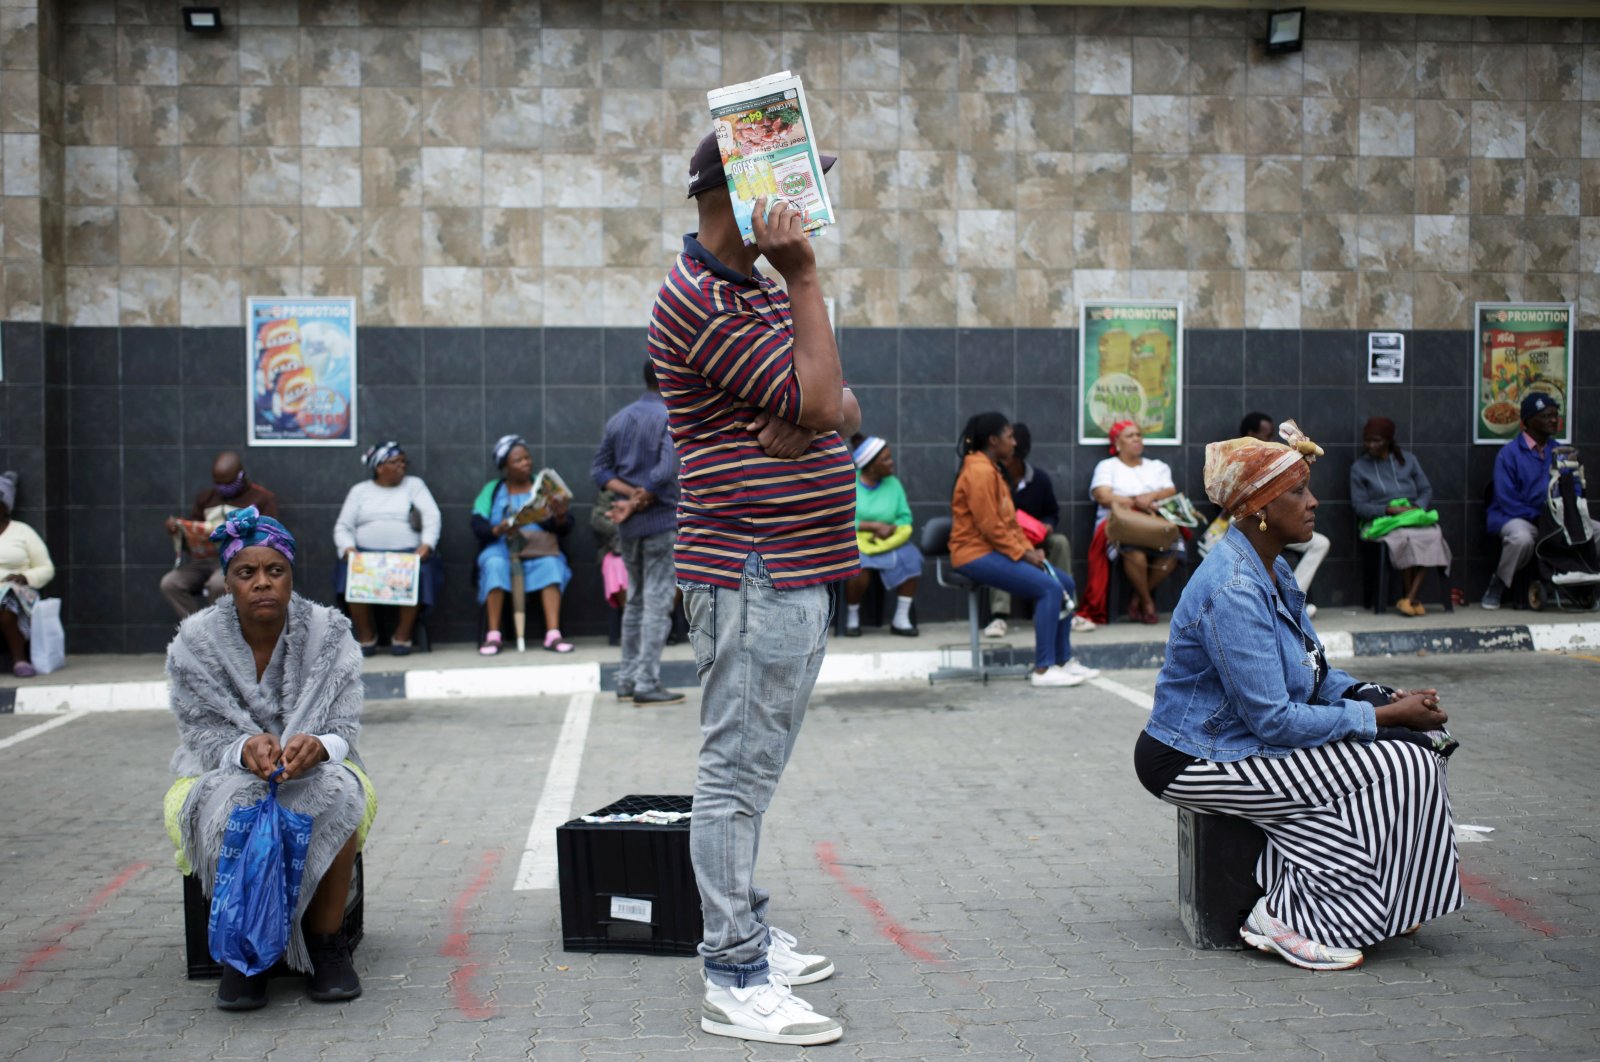 Shoppers queue in line with social distance rules during a 21-day nationwide COVID-19 lockdown in Soweto, South Africa, March 30, 2020. (Reuters Photo)